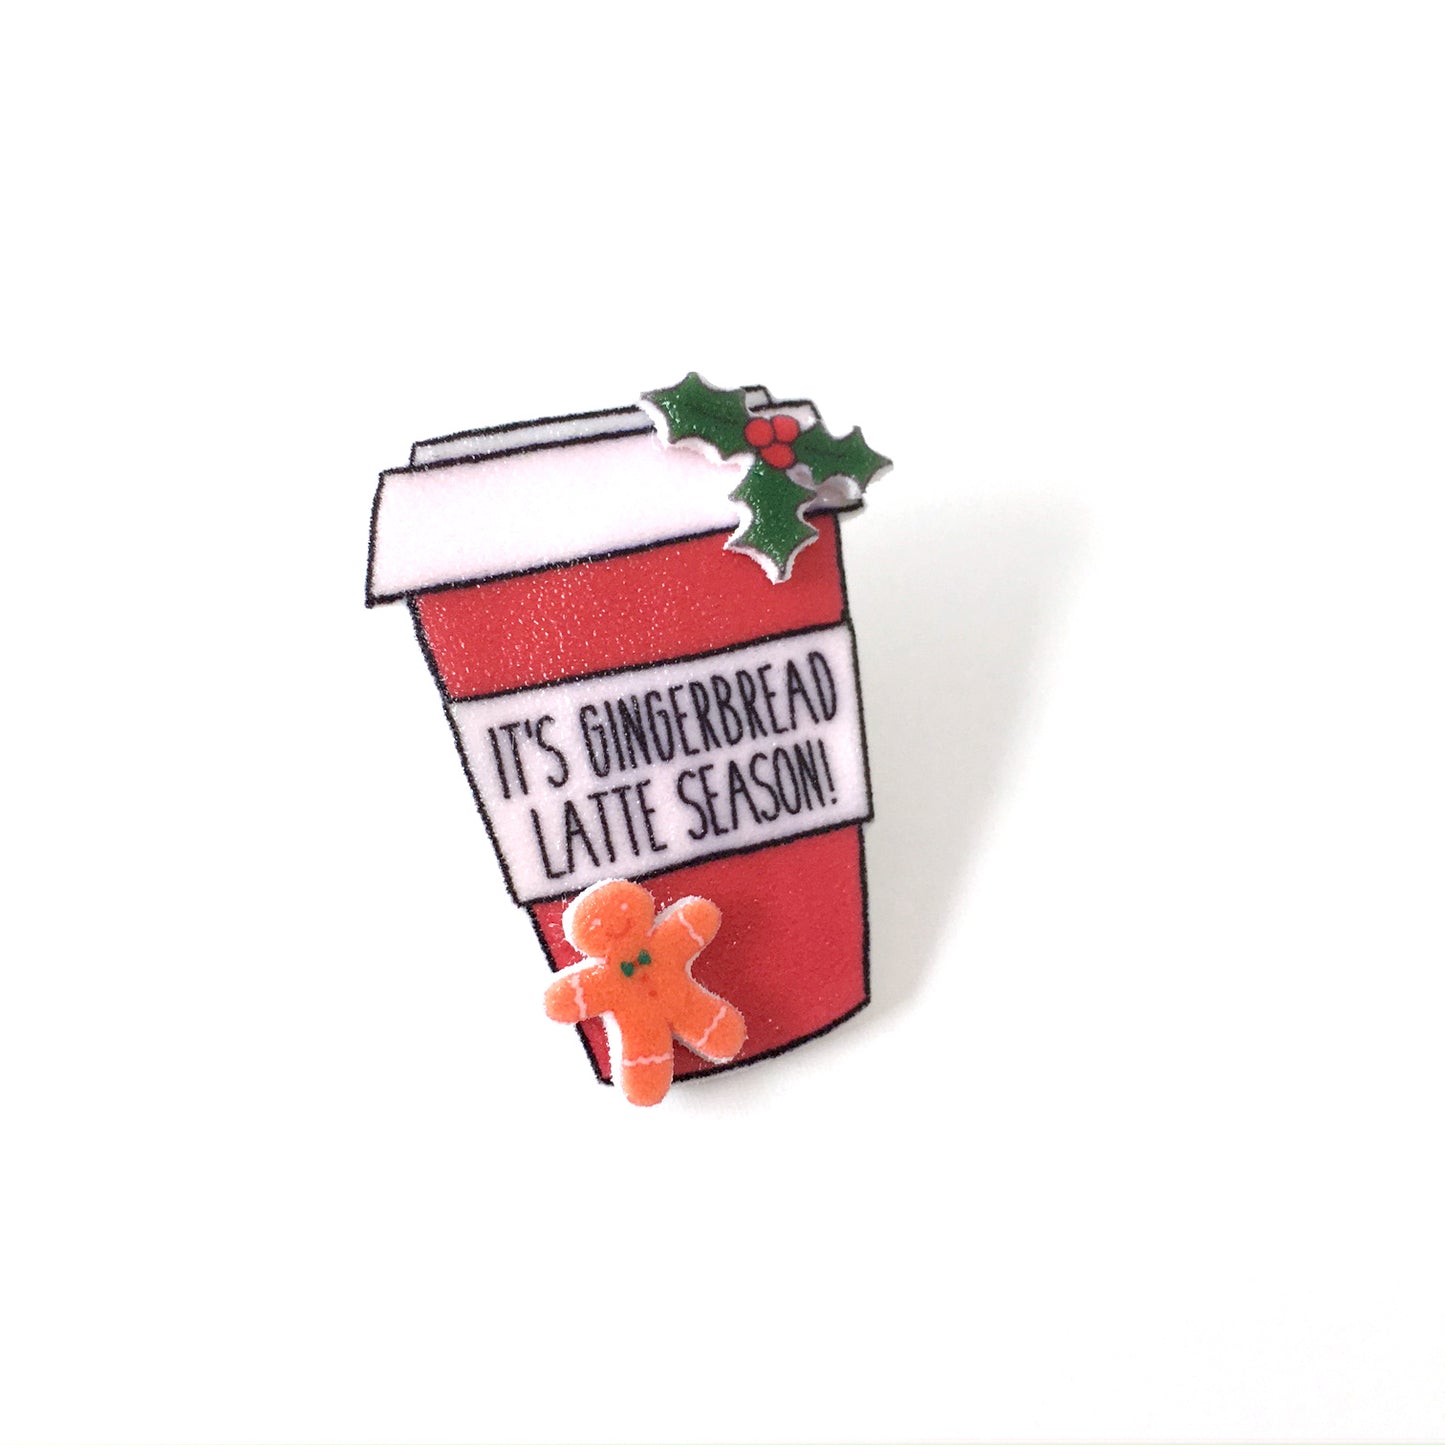 Gingerbread latte coffee cup pin badge stocking filler gift